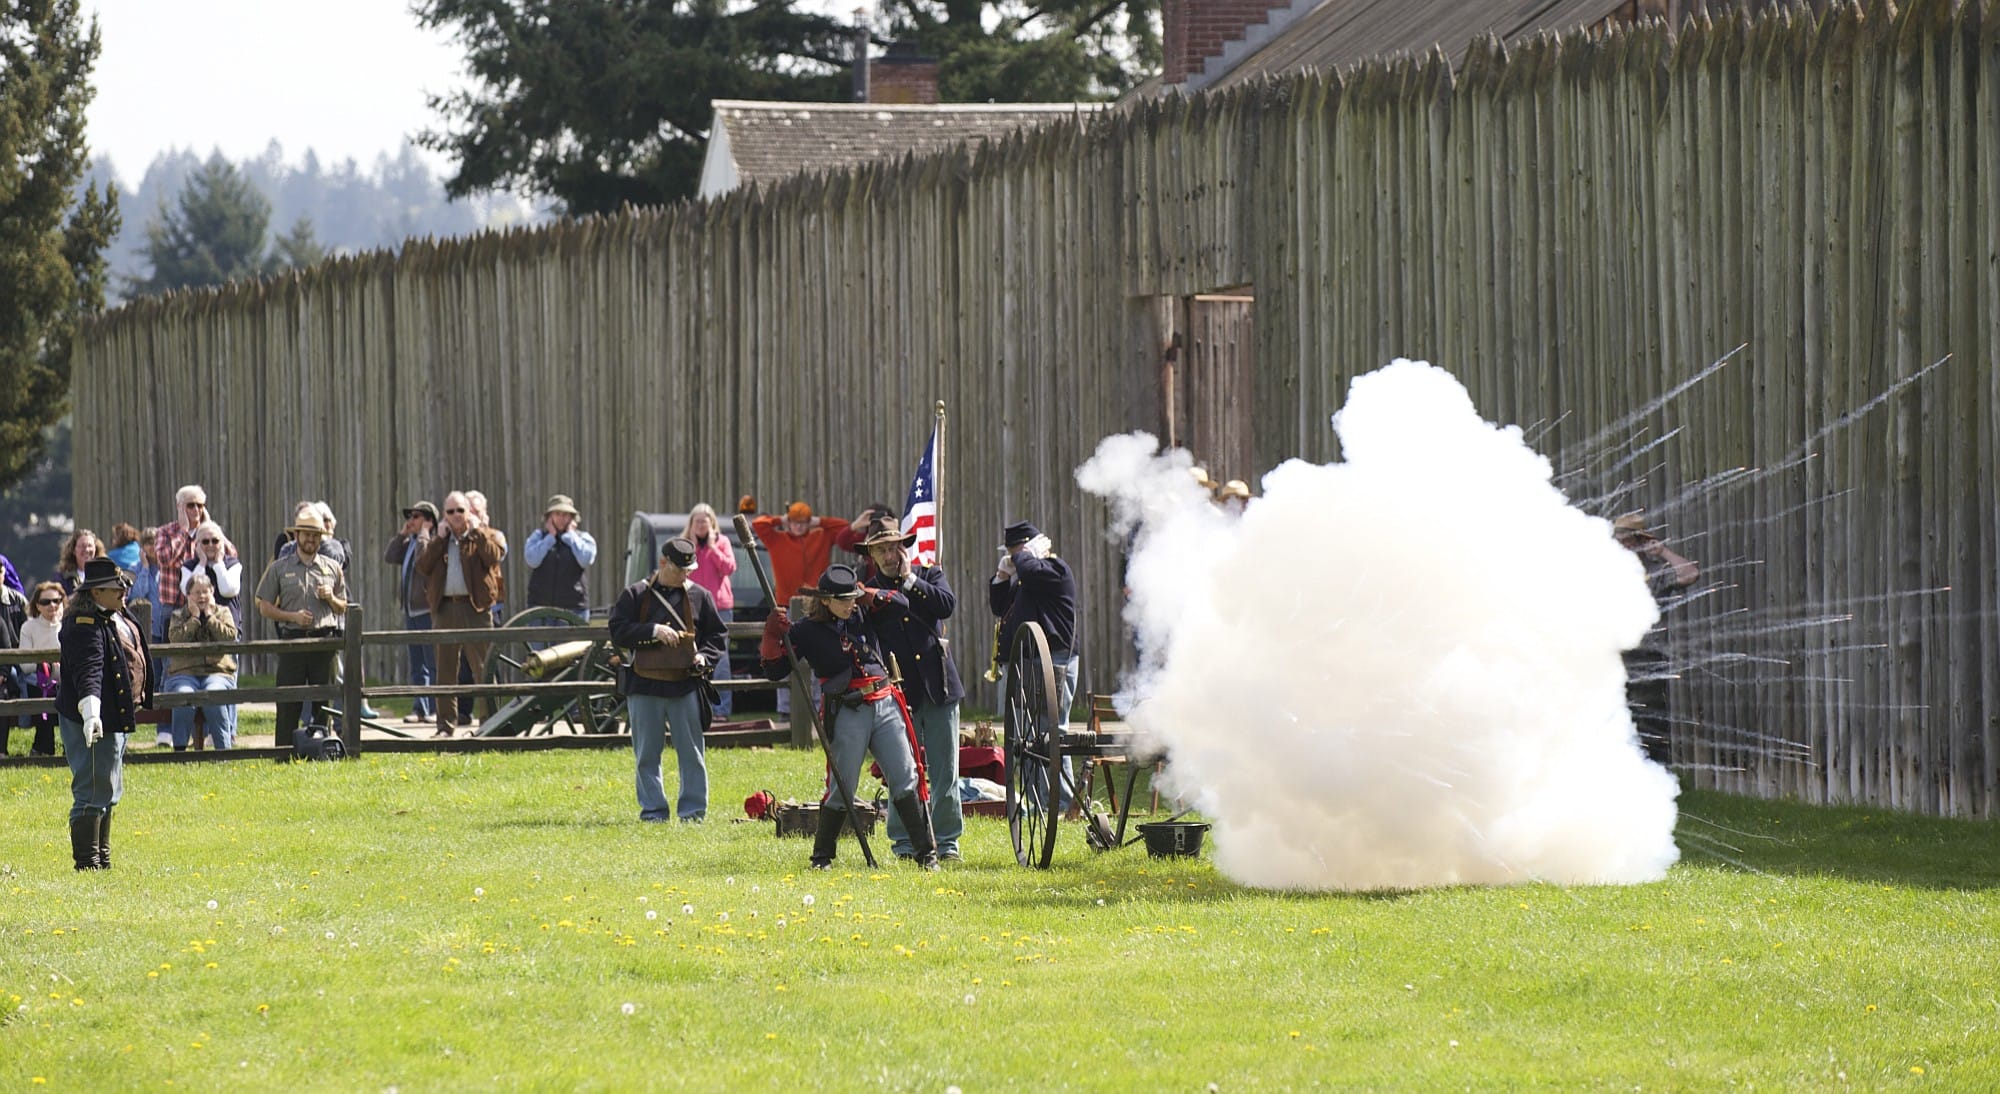 Re-enactors at Fort Vancouver fired a howitzer Thursday during a commemoration of the 150th anniversary of the Civil War surrender of General Robert E.